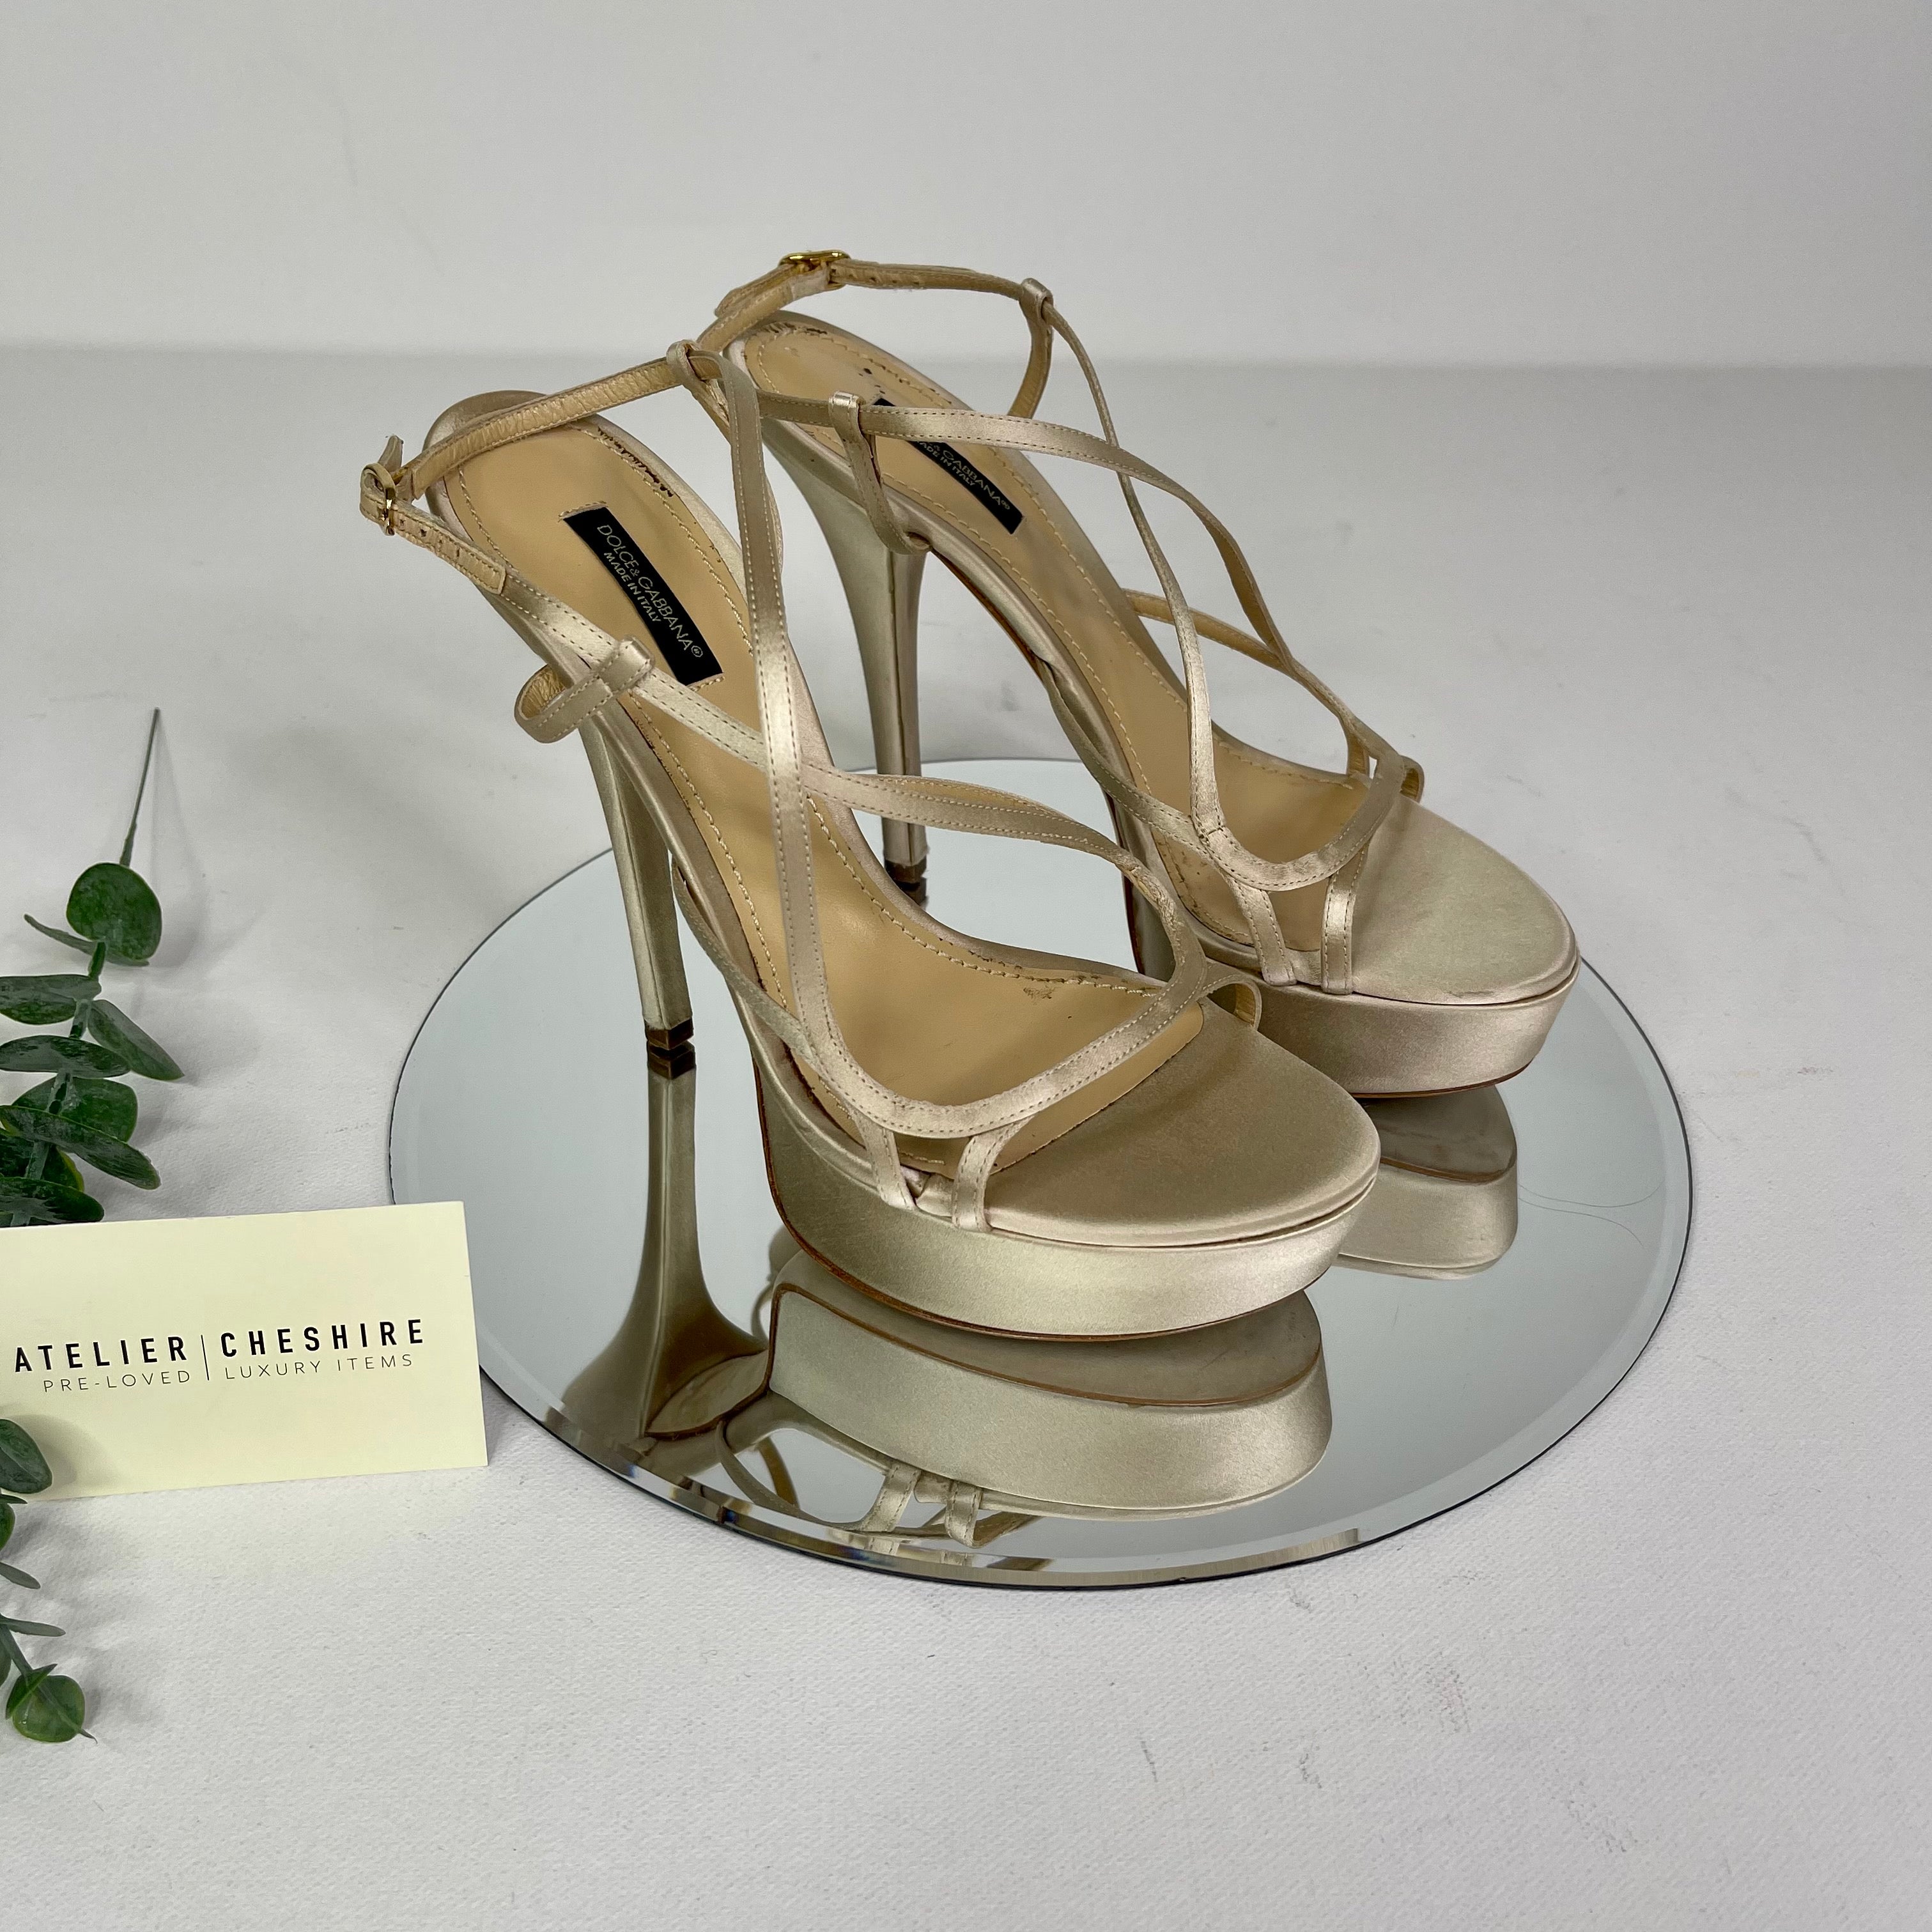 Dolce & Gabbana Satin Sandals in Pale Gold (Size 39) – Atelier Cheshire